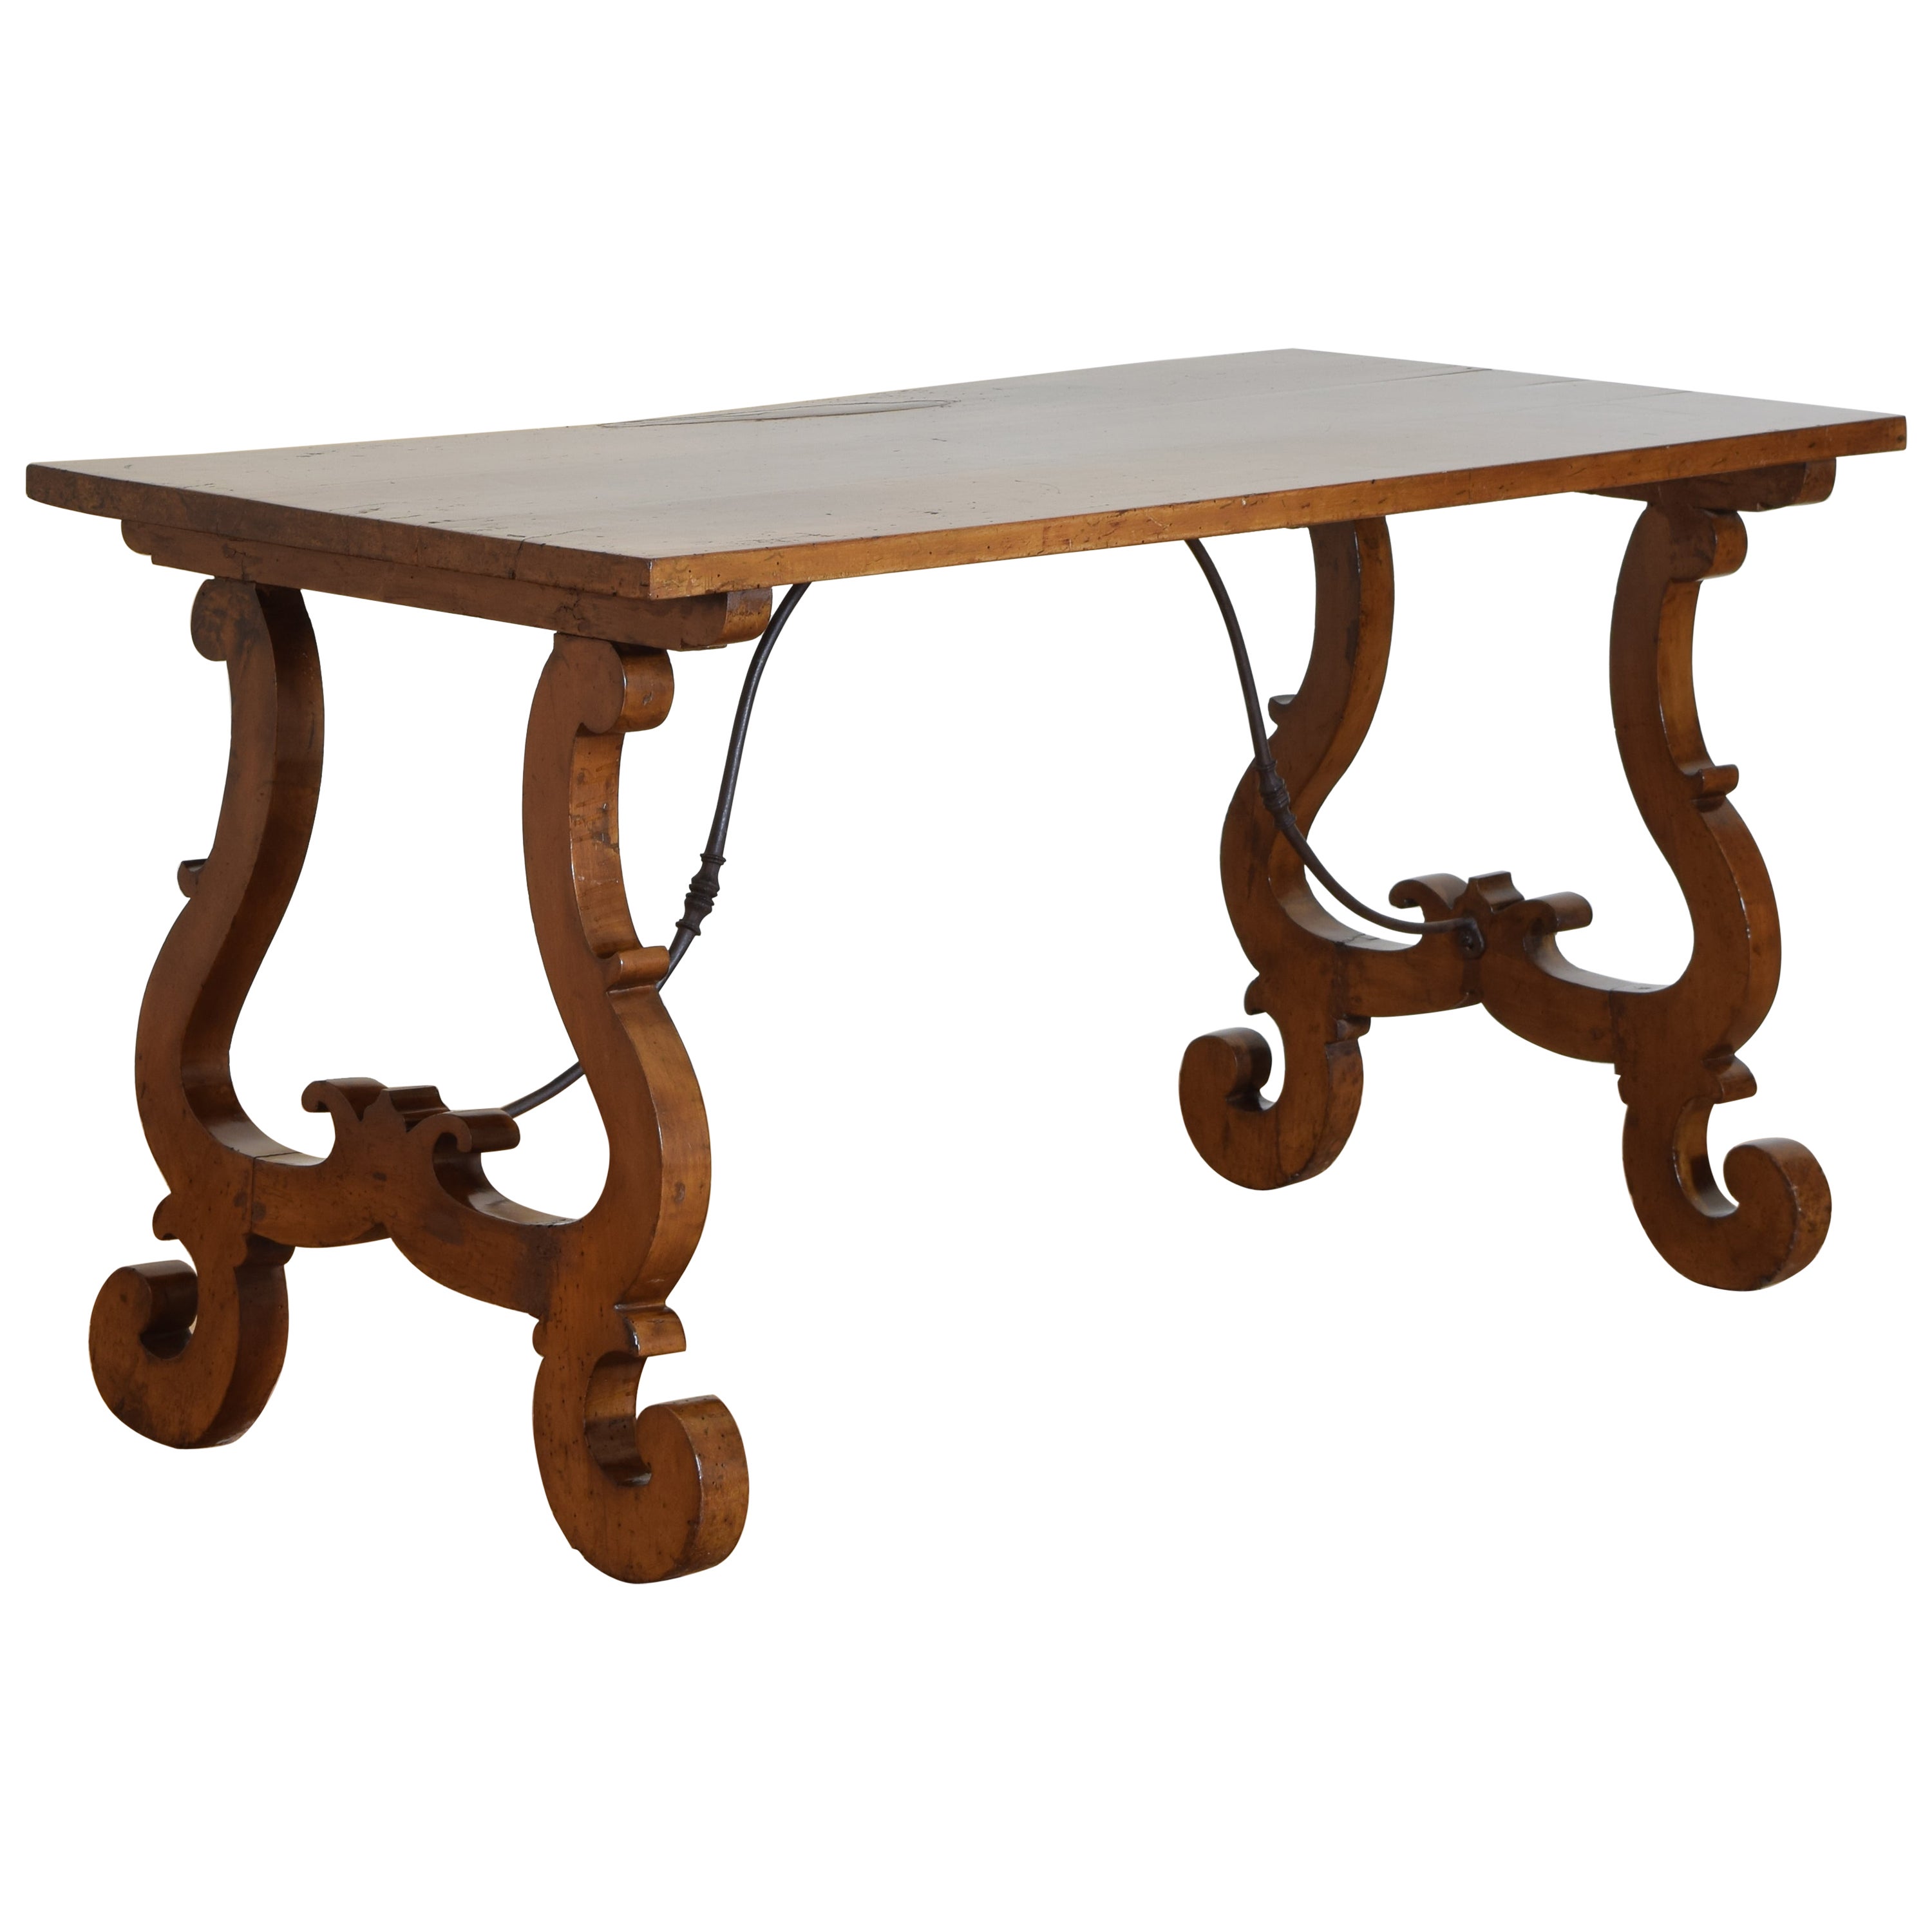 Italian, Toscana, Pearwood & Iron Center or Dining Table, 17th/18th Century